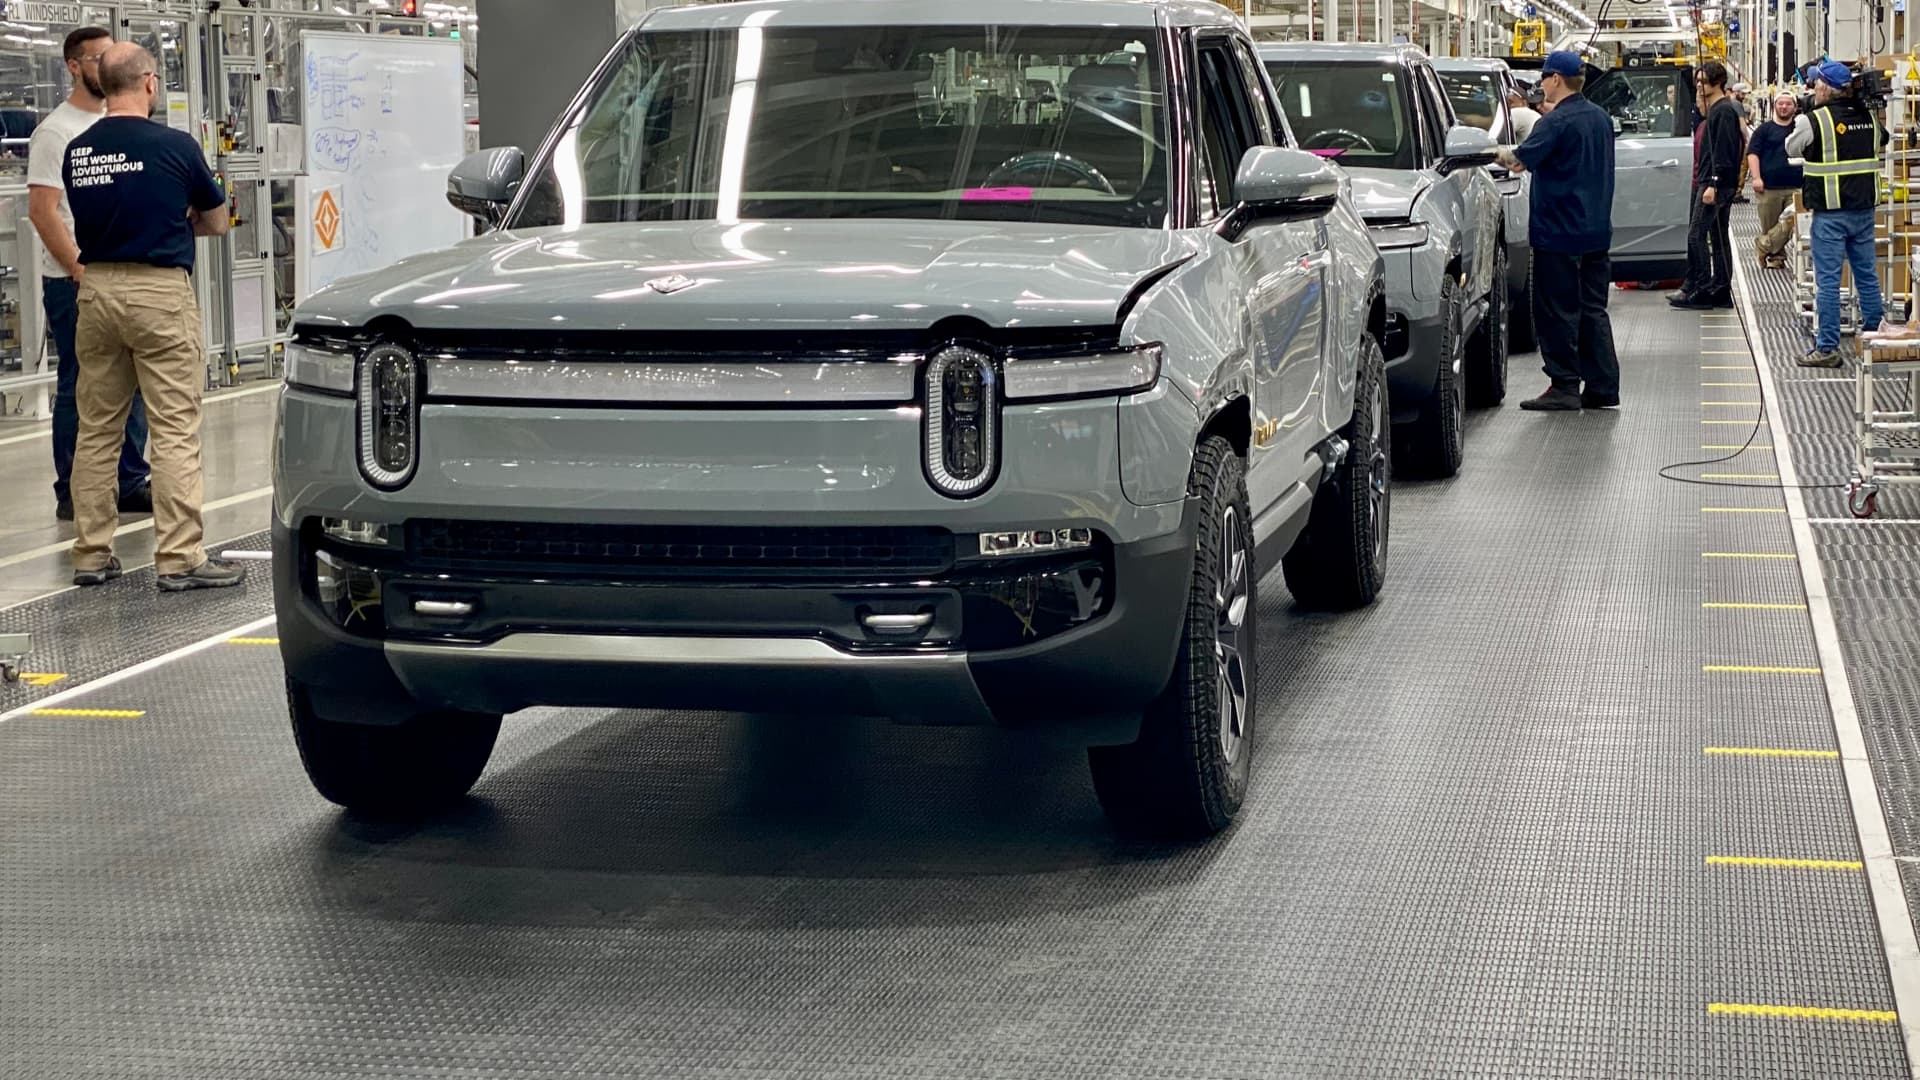 Rivian shares slumped after the company announced a big recall